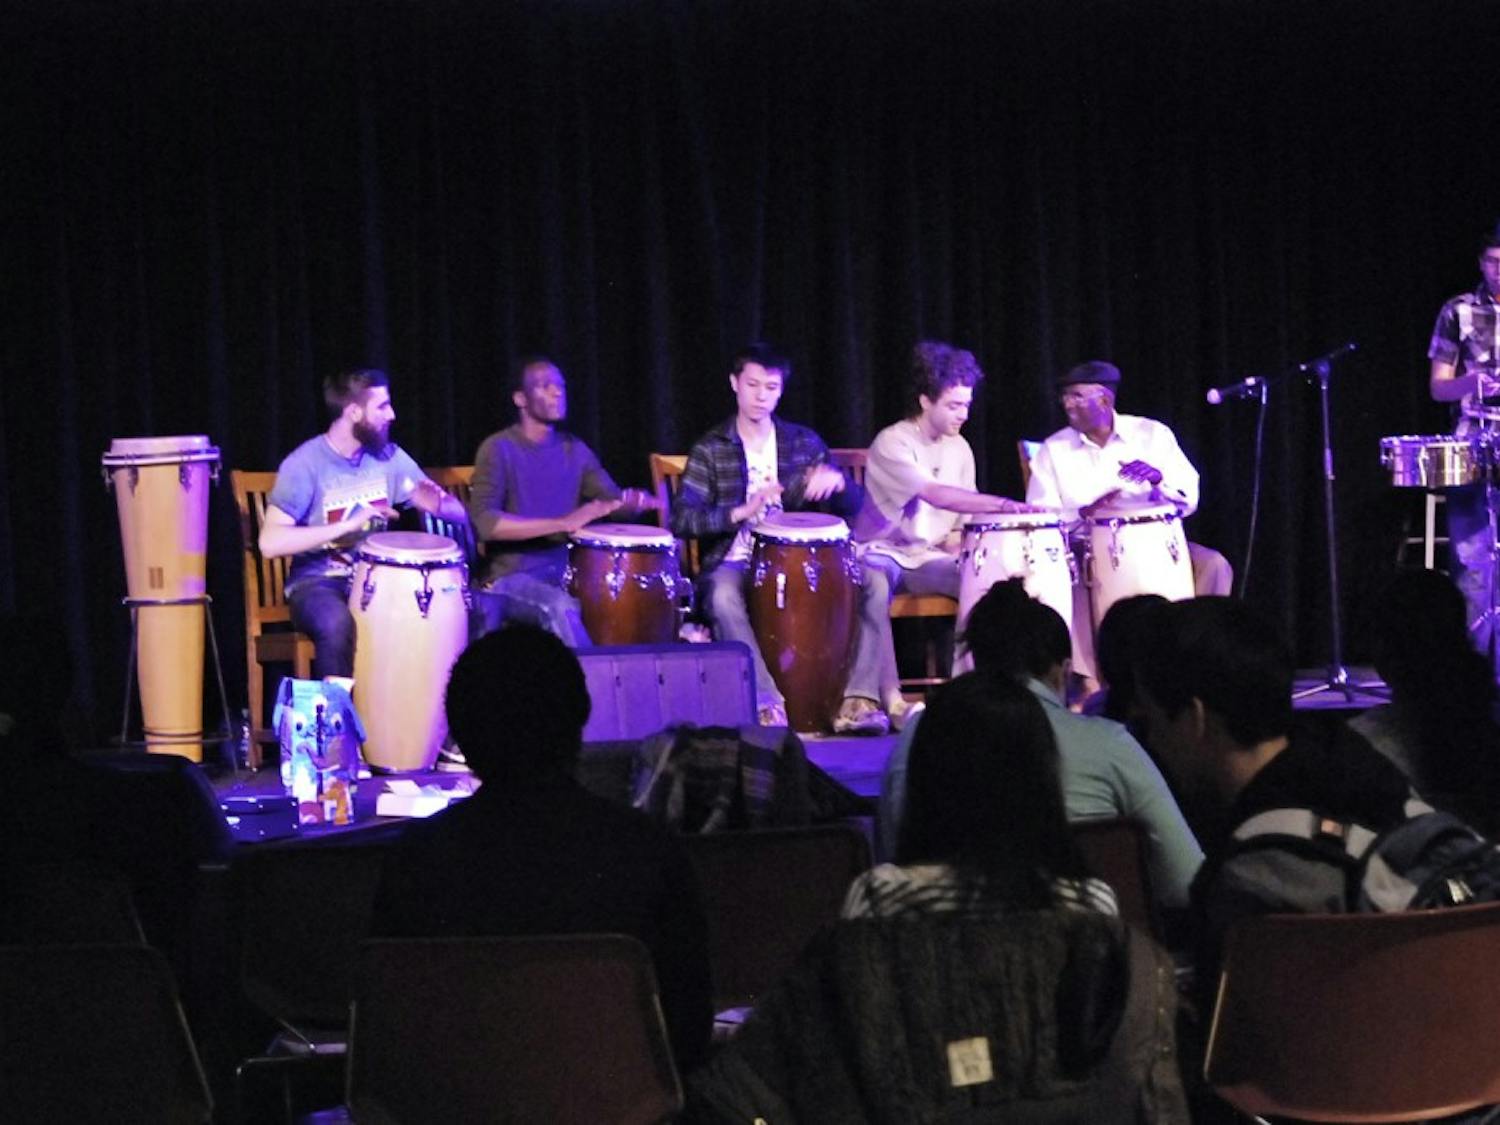 Dartmouth musicians welcomed the Nile Project at “Sing Africa!”